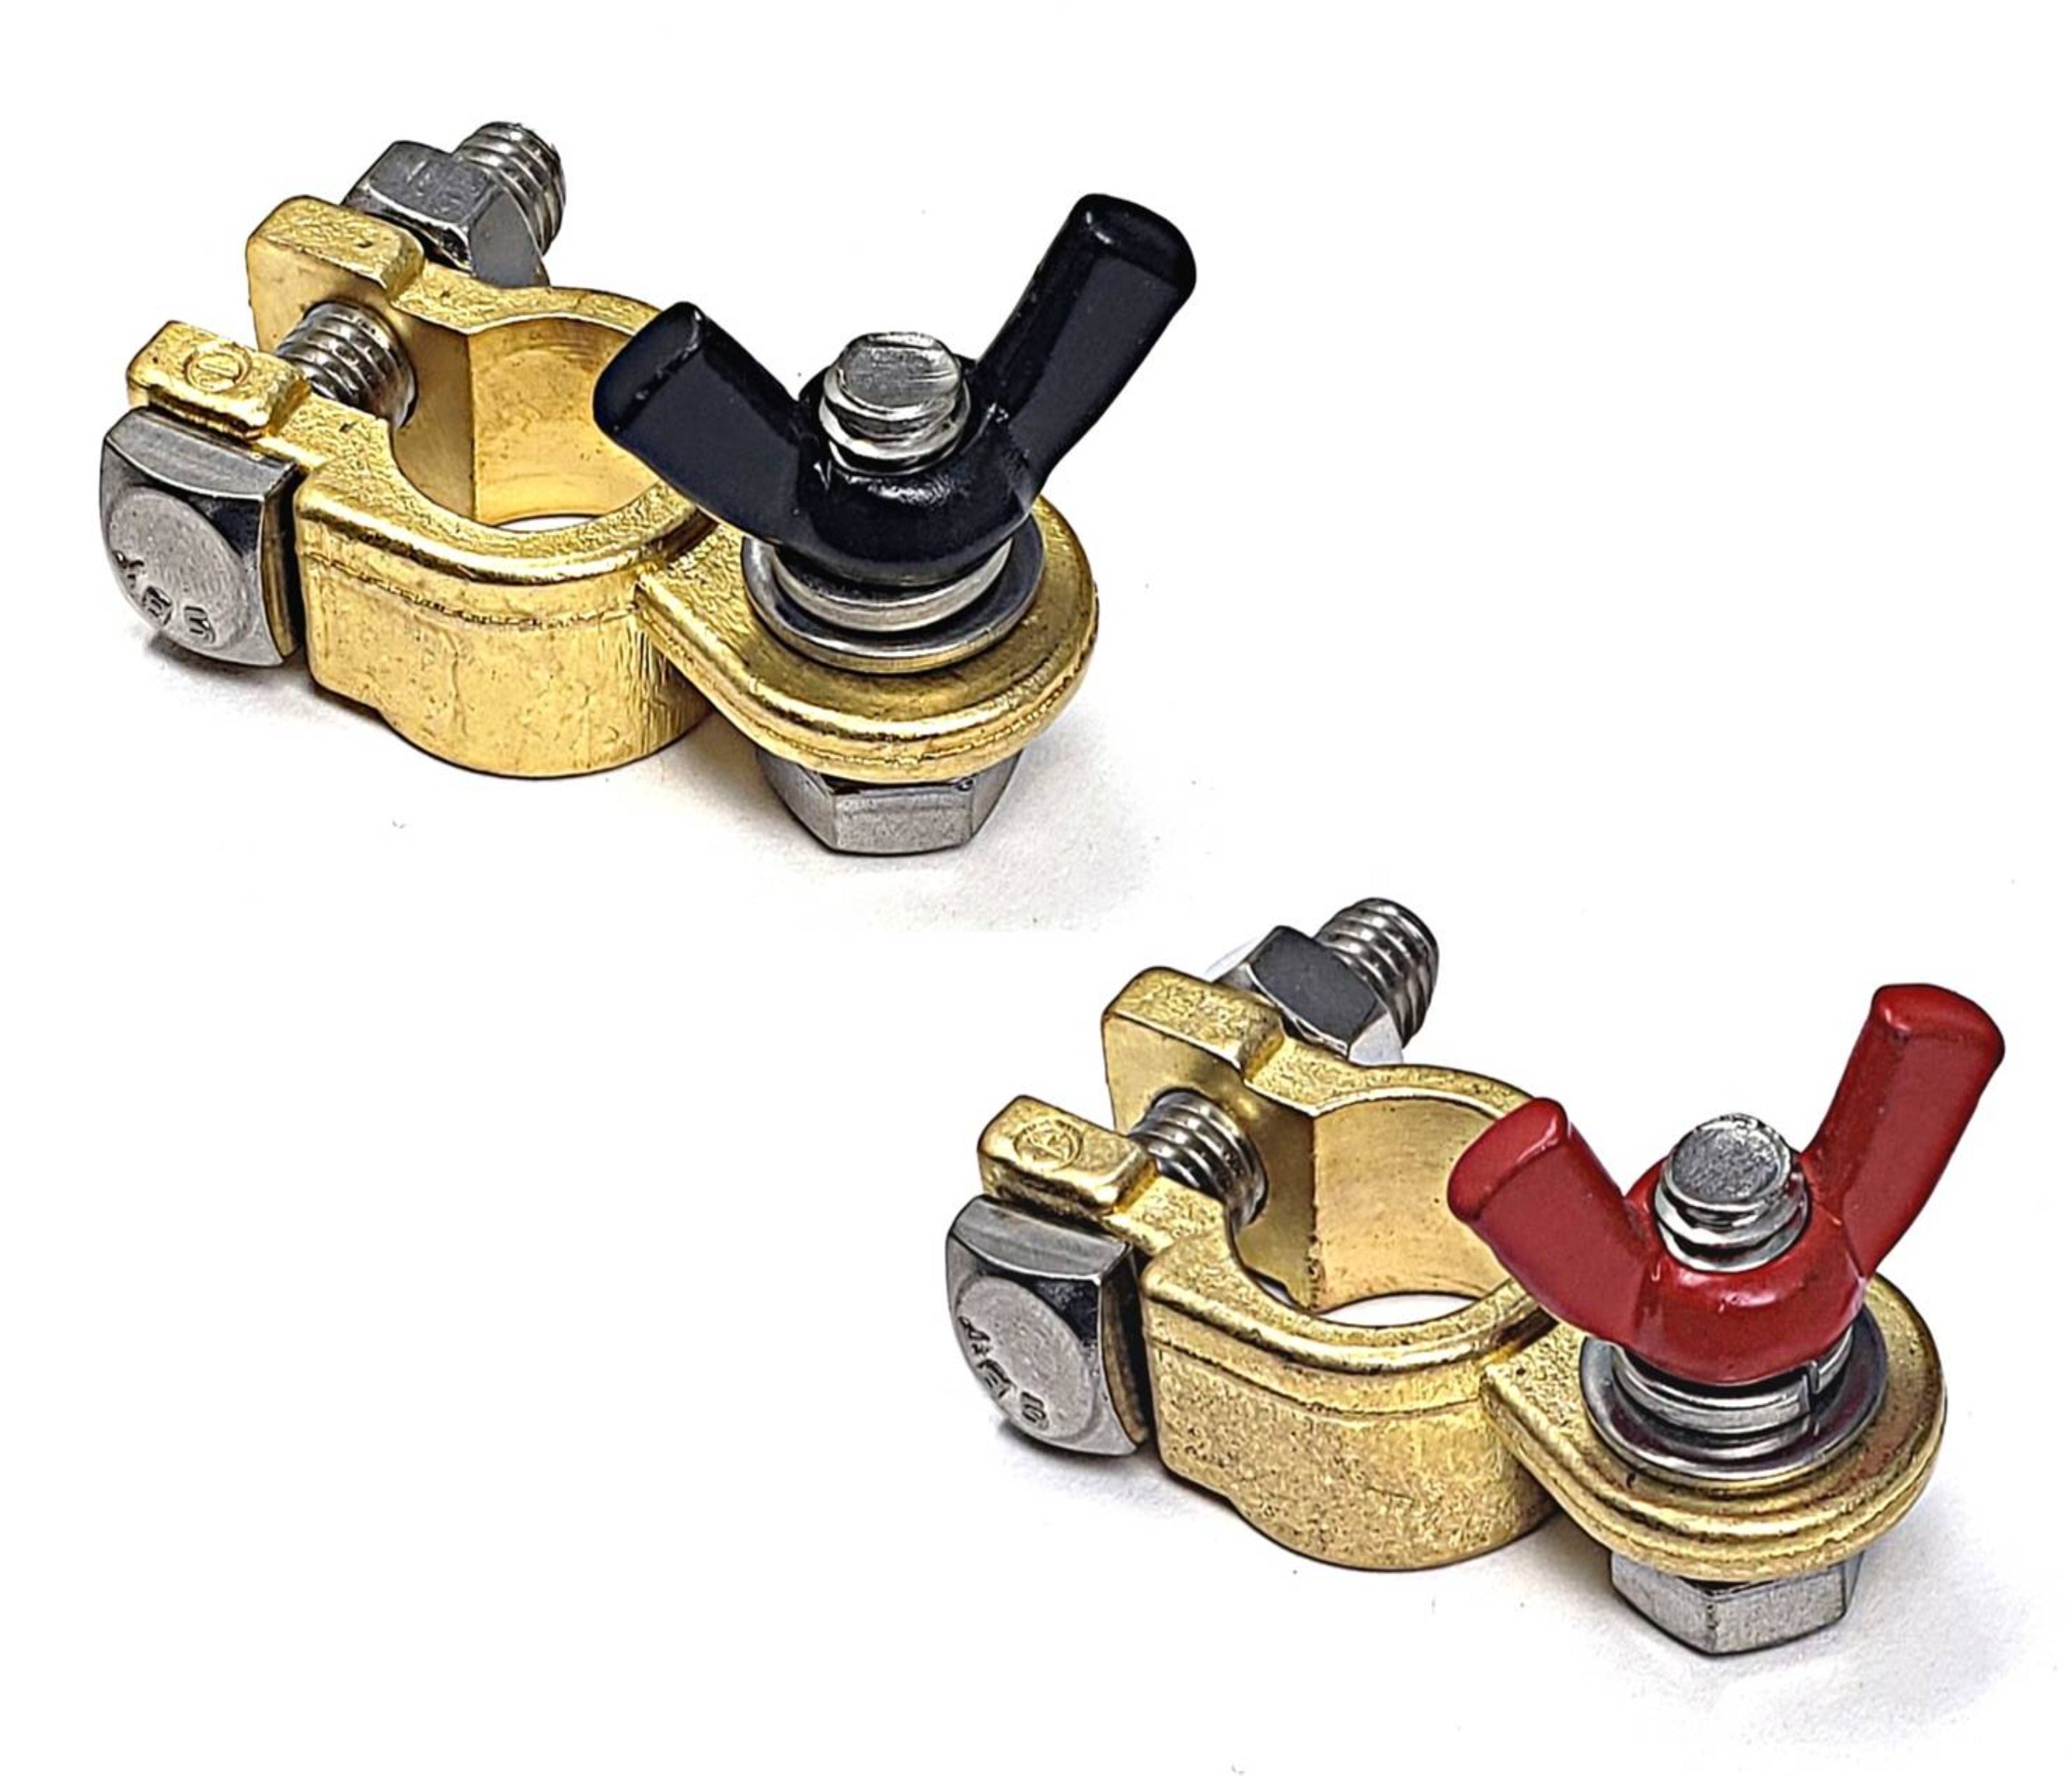 Automotive Marine Military and Misc Battery Terminal Connectors